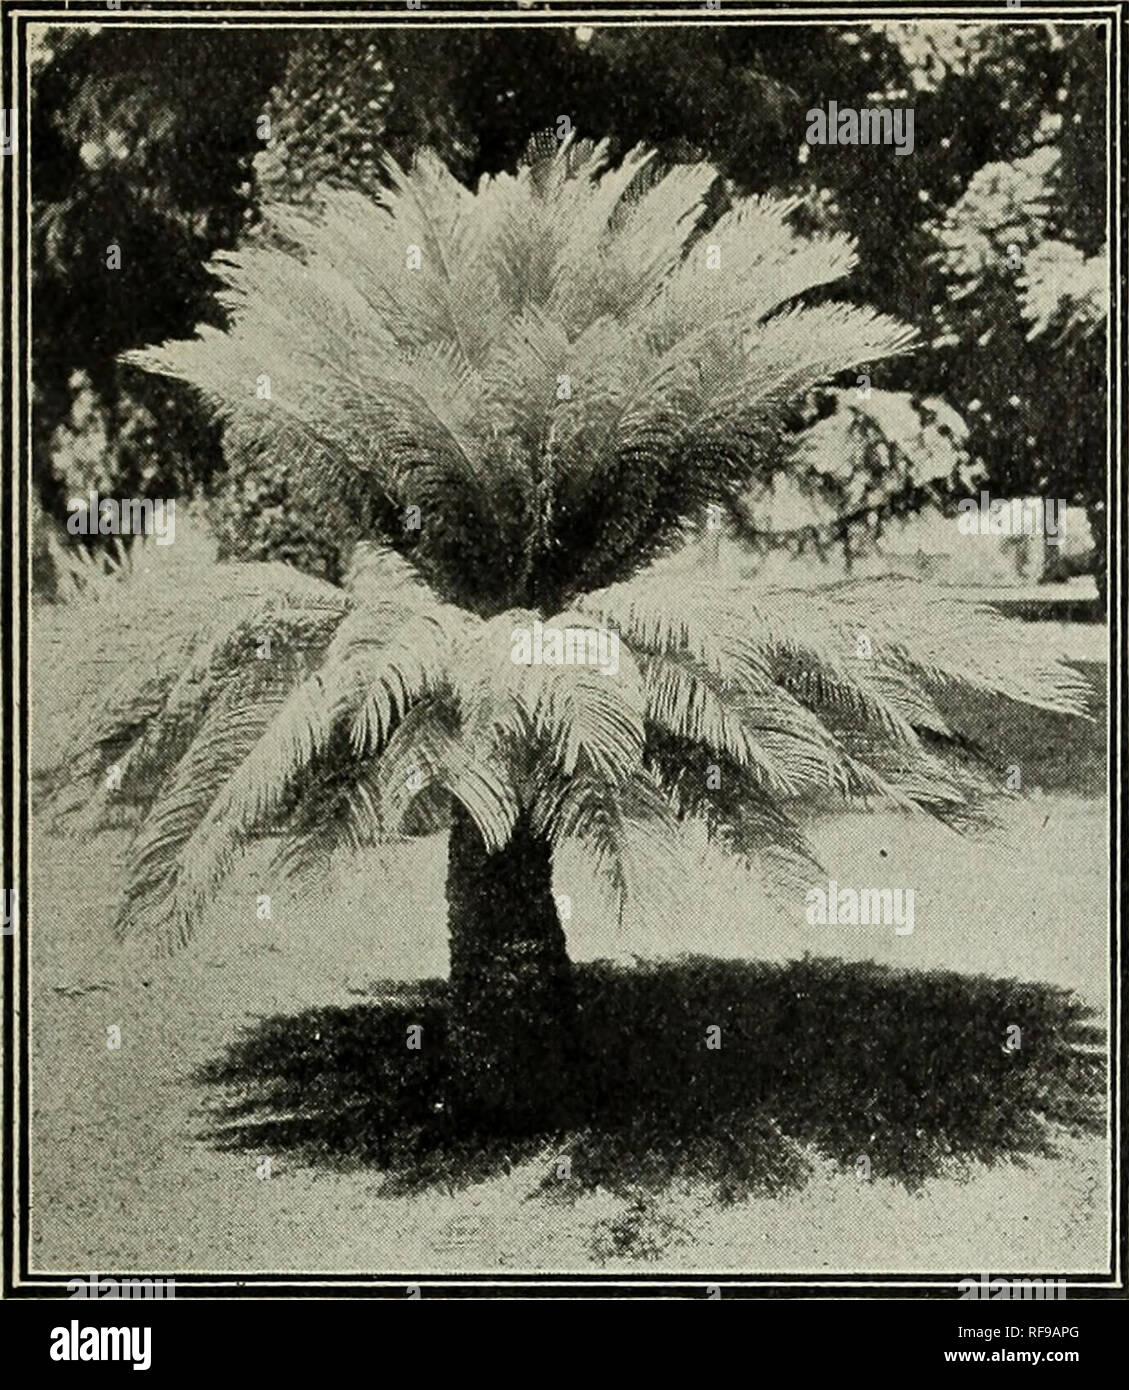 . [Catalogue]. Nursery stock California Fresno Catalogs; Nurseries (Horticulture) California Fresno Catalogs; Fruit trees Seedlings Catalogs; Fruit Catalogs; Plants, Ornamental Catalogs; Trees Seedlings Catalogs; Shrubs Catalogs. FANCHER CREEK NURSERIES. 113. Cycas Revoluta. The Sago Palm. MACROZAMIA. *Macroz,amia spiralis. A very handsome palm with long pinnated shining, green leaves, except at the base where they are ivory white. Leaves and trunk some- what similar to Cycas. PHOENIX. Phoenix Canariensis. &quot;Canary Island Palm.&quot; The most graceful and the handsomest of our hardy palms; Stock Photo